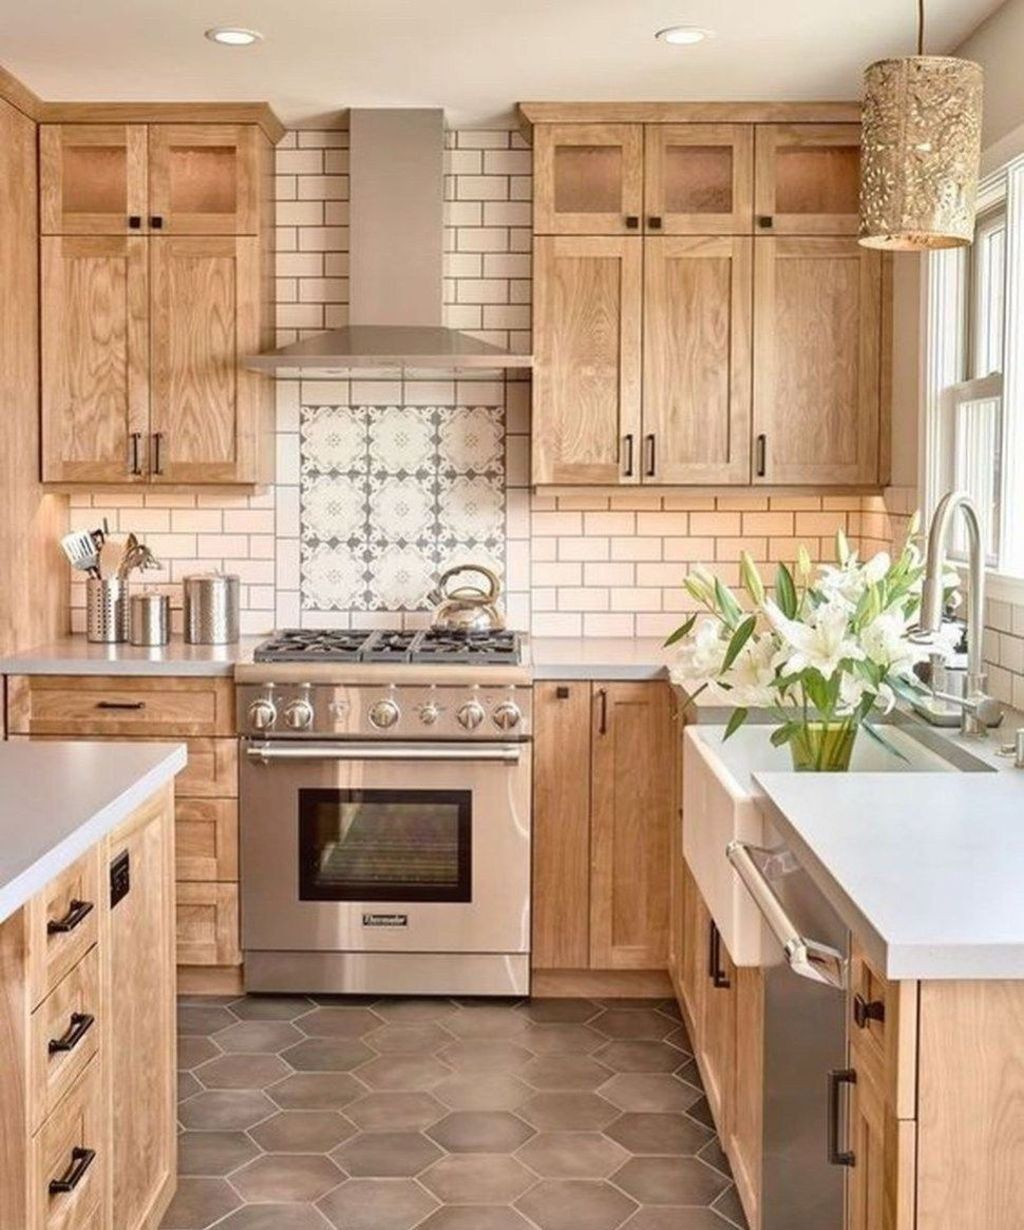 Cool Diy Kitchen Design Ideas You Will Definitely Want To Keep 20